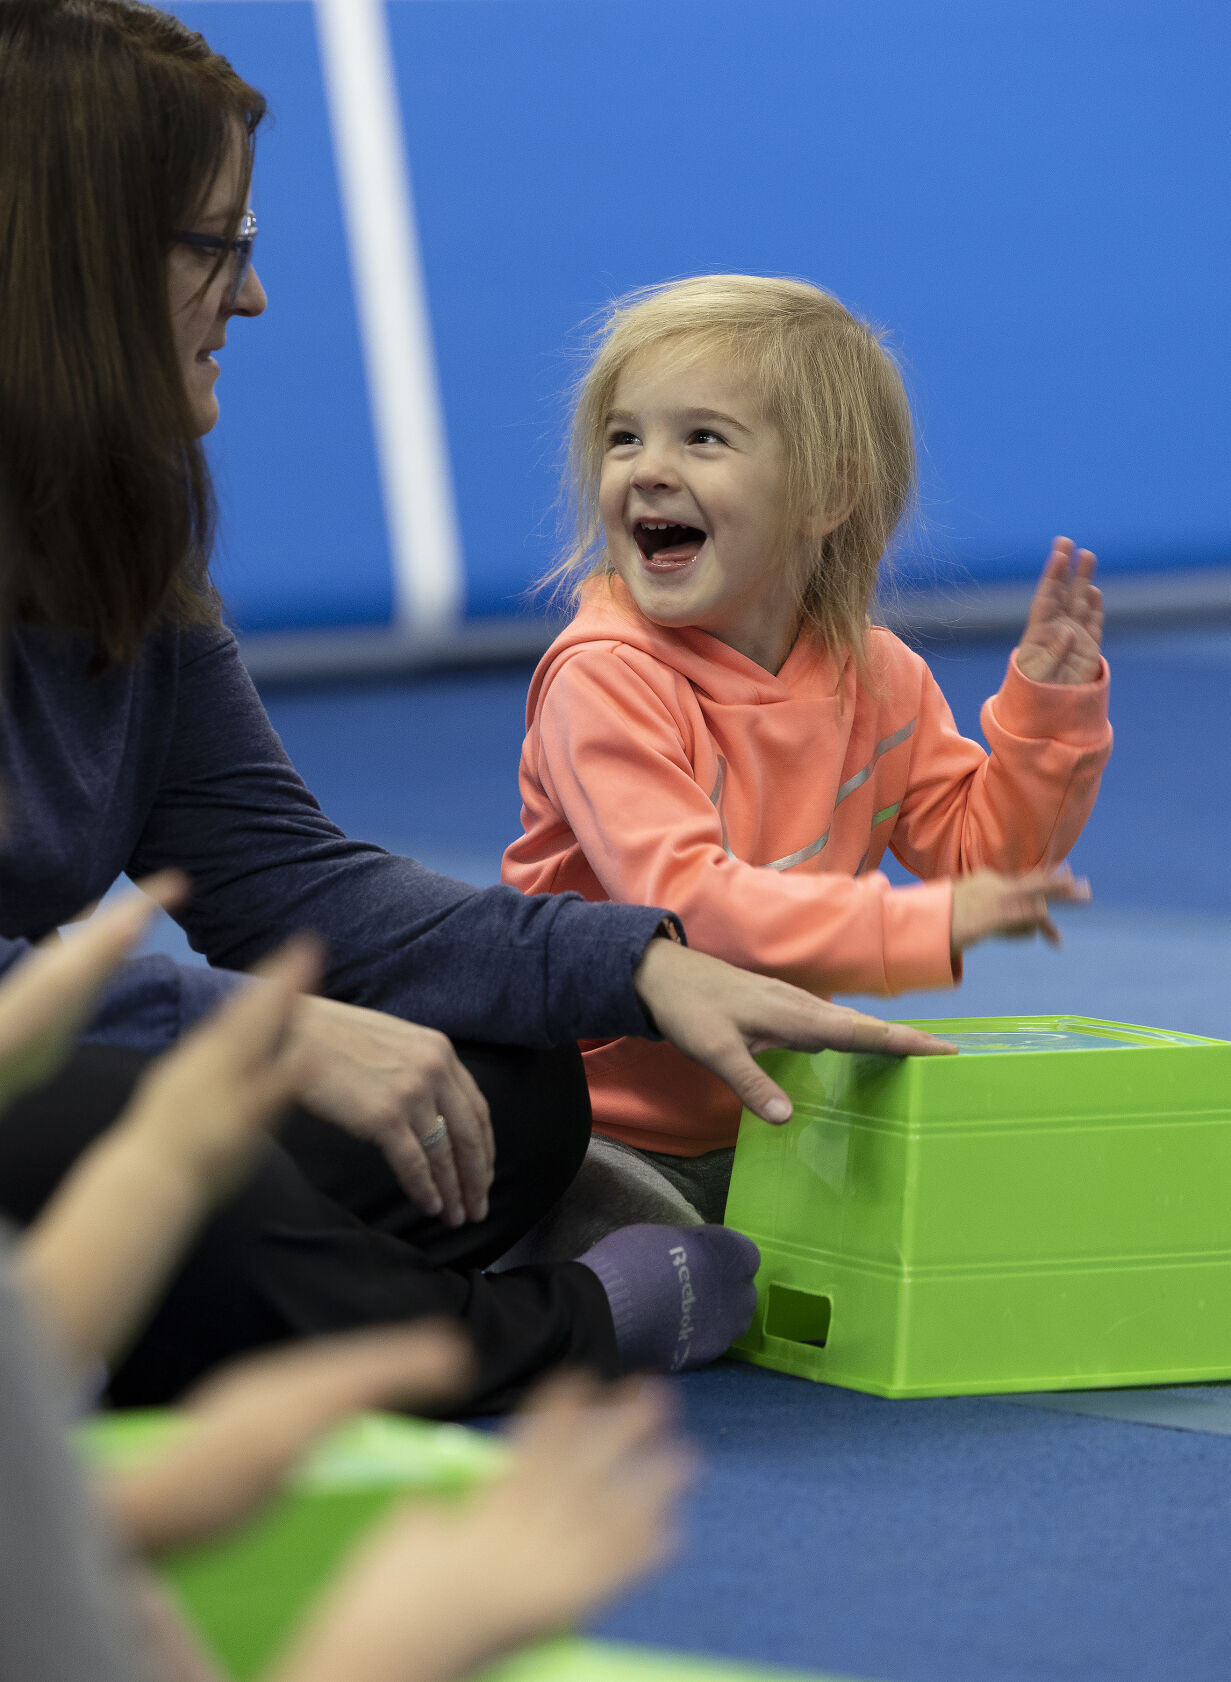 Marissa Tyson, 3, drums on a container as she looks at her mom, Nicole, during a Mommy and Me Music Class at Badger Elite Athletics in Shullsburg, Wis.    PHOTO CREDIT: Stephen Gassman, Telegraph Herald